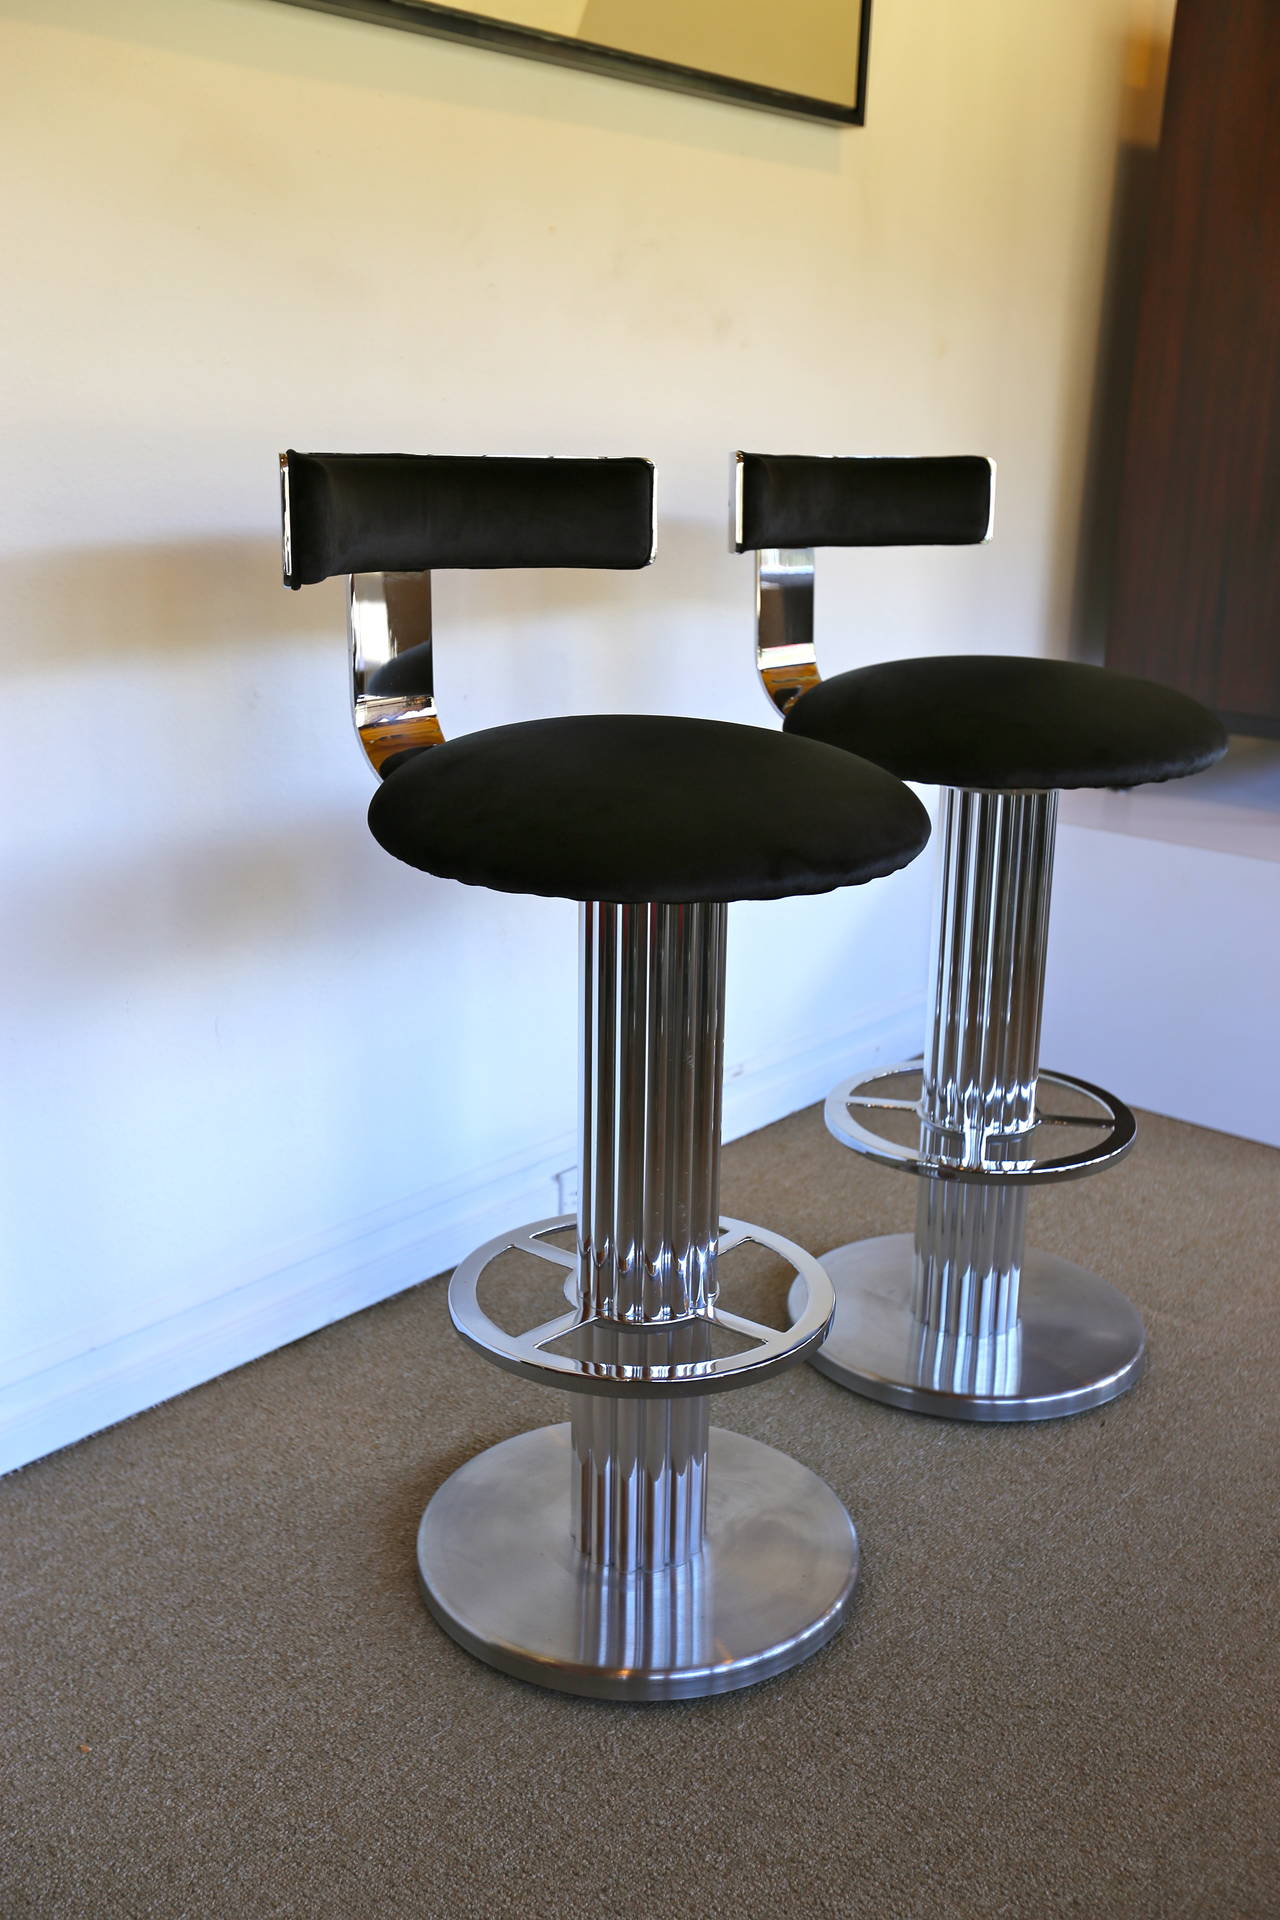 Pair of swivel bar stools by Designs for Leisure.